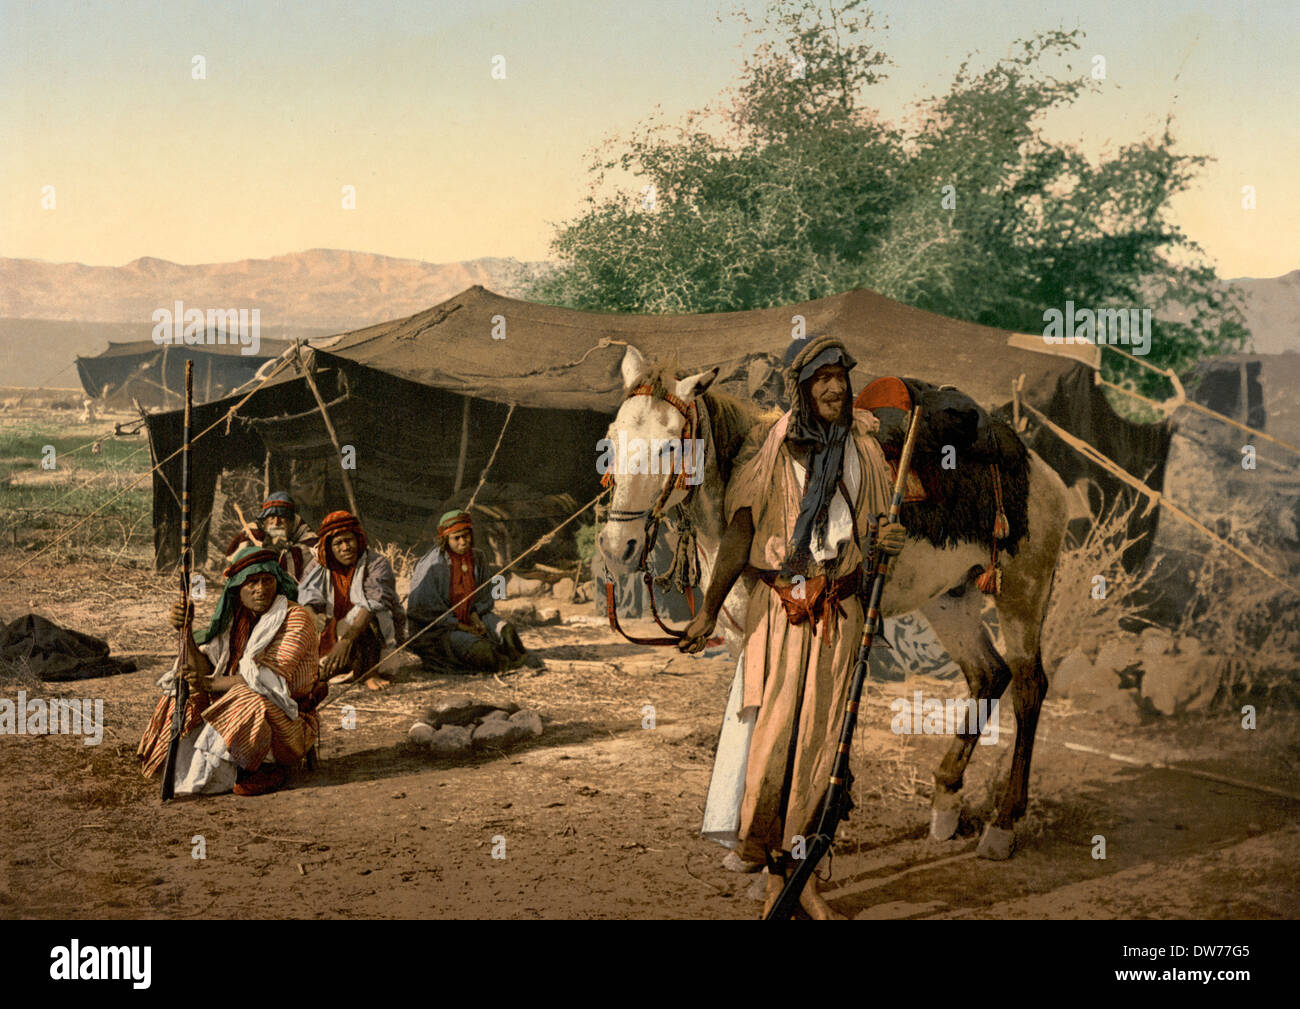 Bedouins and their tents, Holy Land, circa 1900 Stock Photo